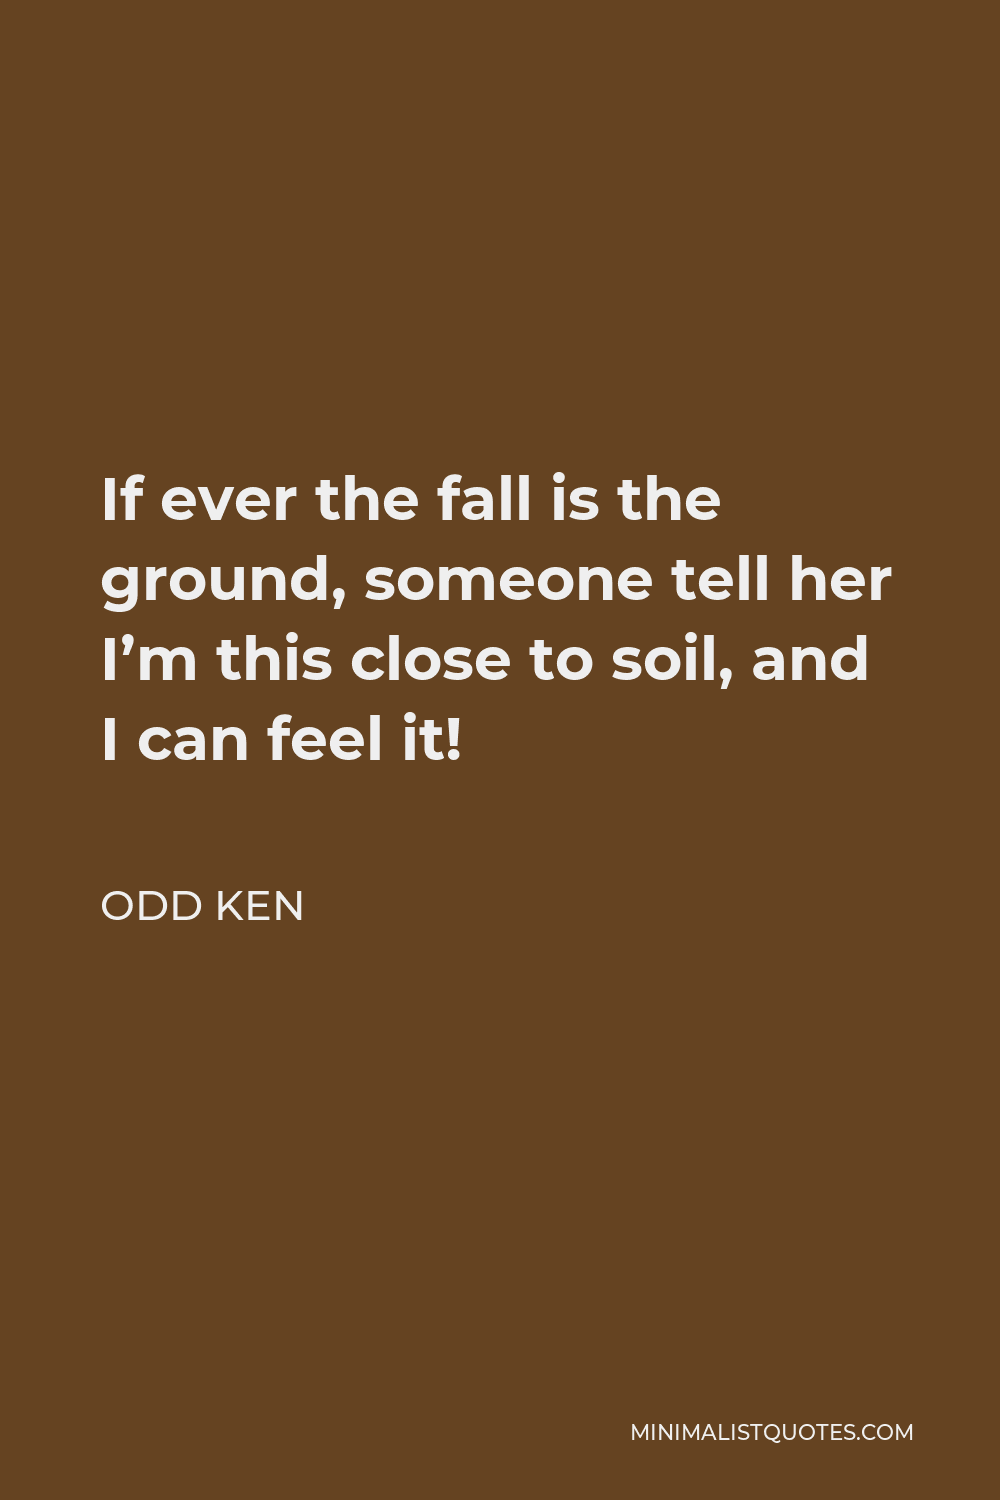 Odd Ken Quote - If ever the fall is the ground, someone tell her I’m this close to soil, and I can feel it!